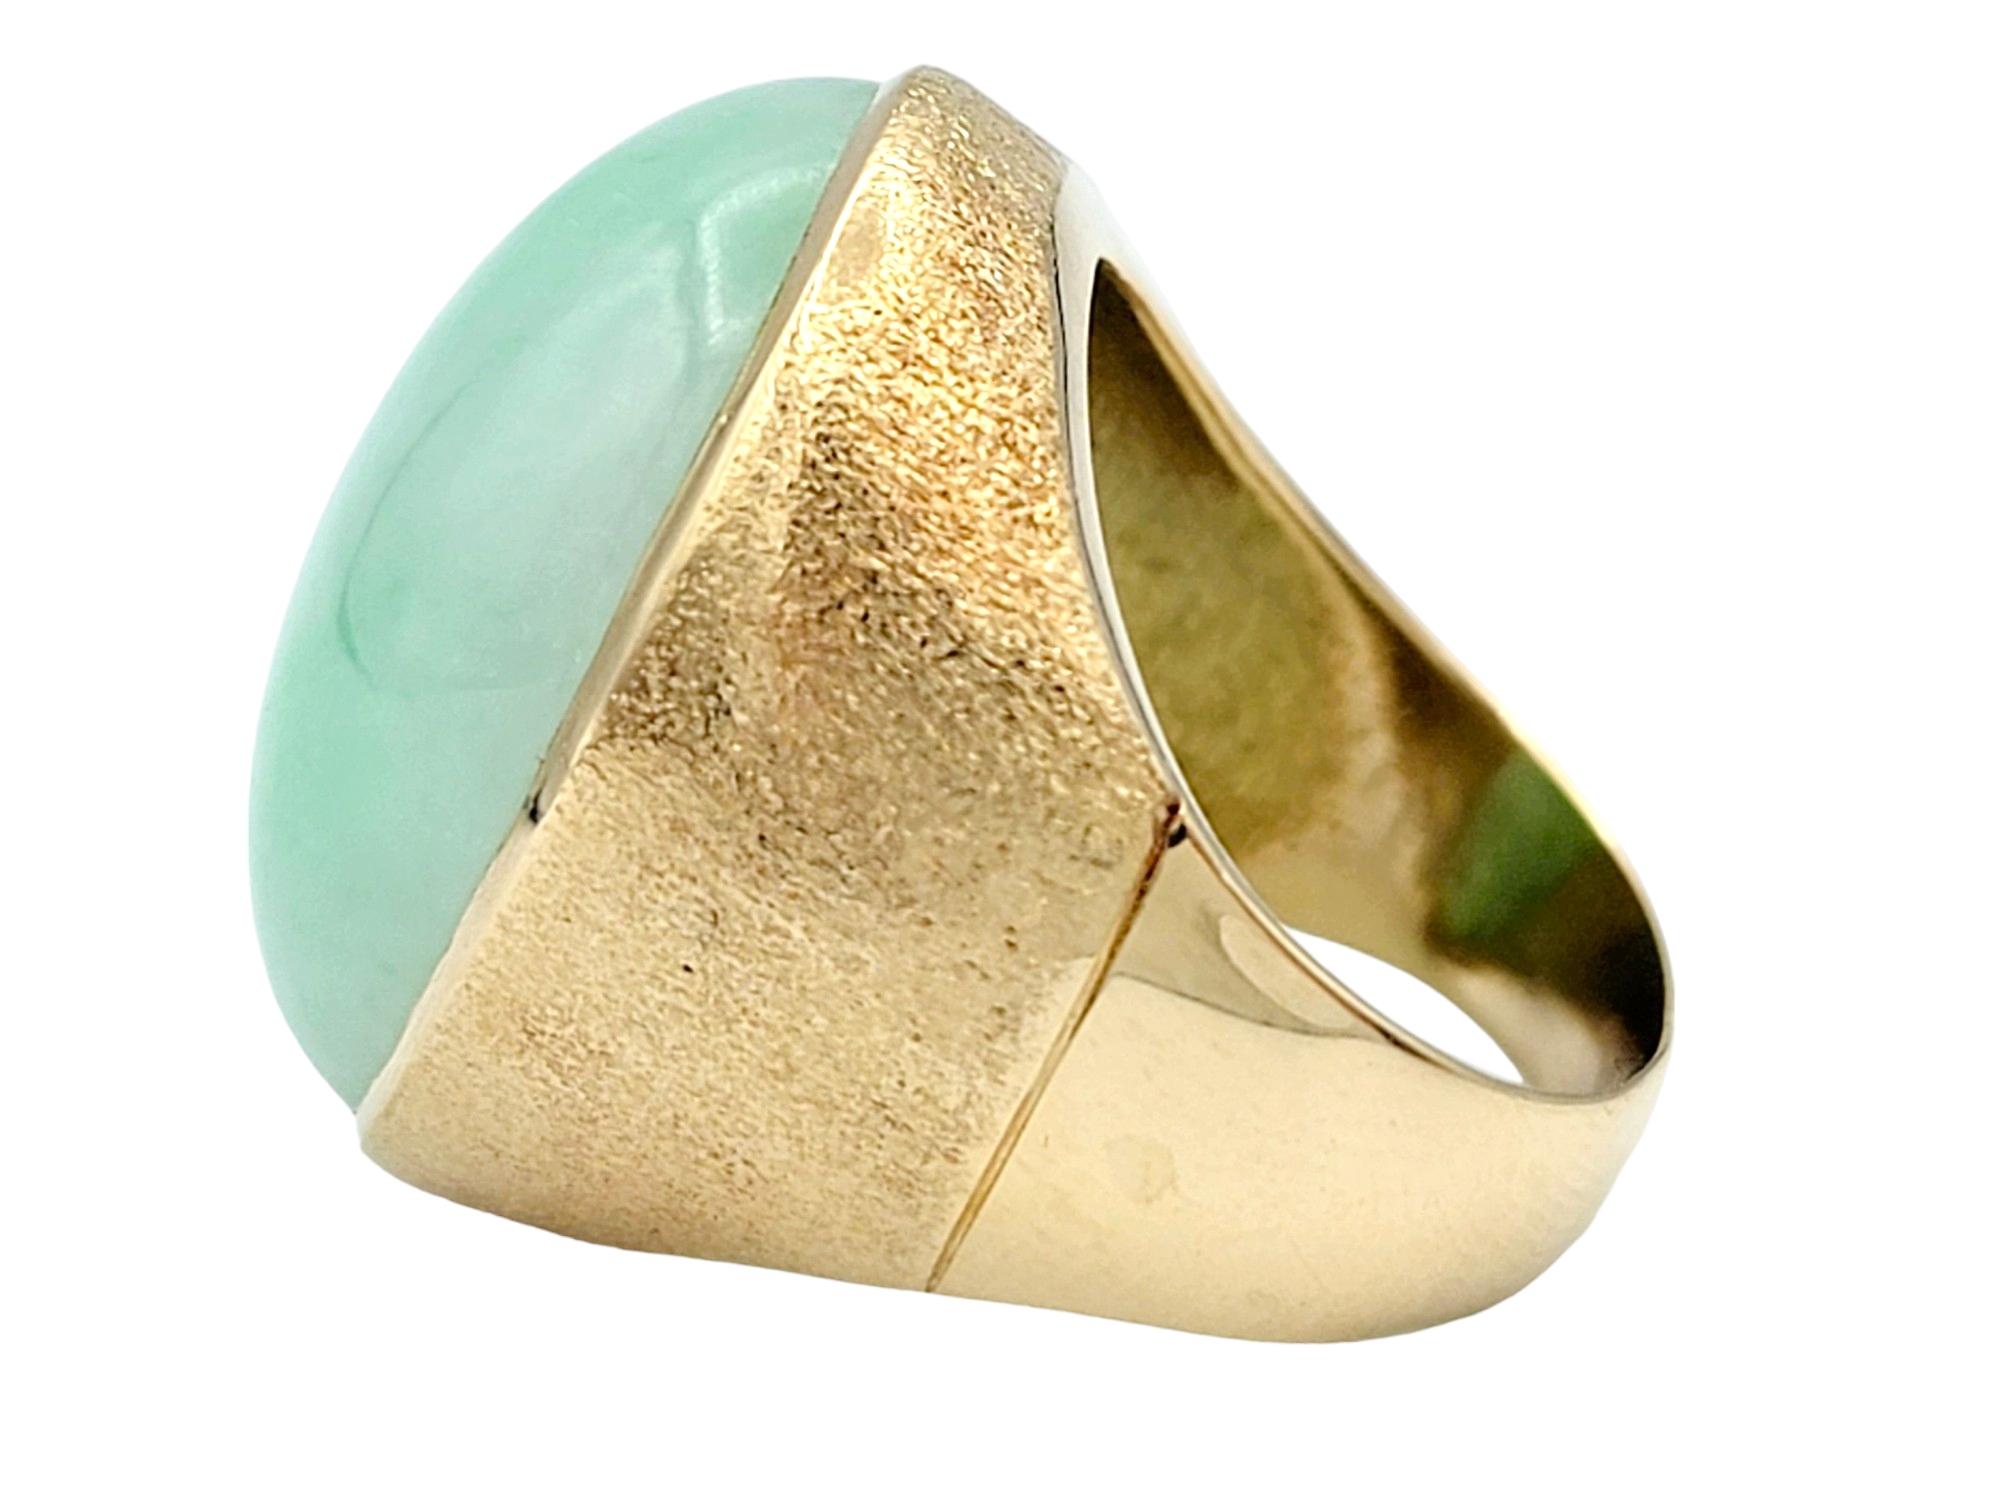 29.40 Carat Solitaire Oval Cabochon Green Nephrite Jade Ring in Yellow Gold In Good Condition For Sale In Scottsdale, AZ